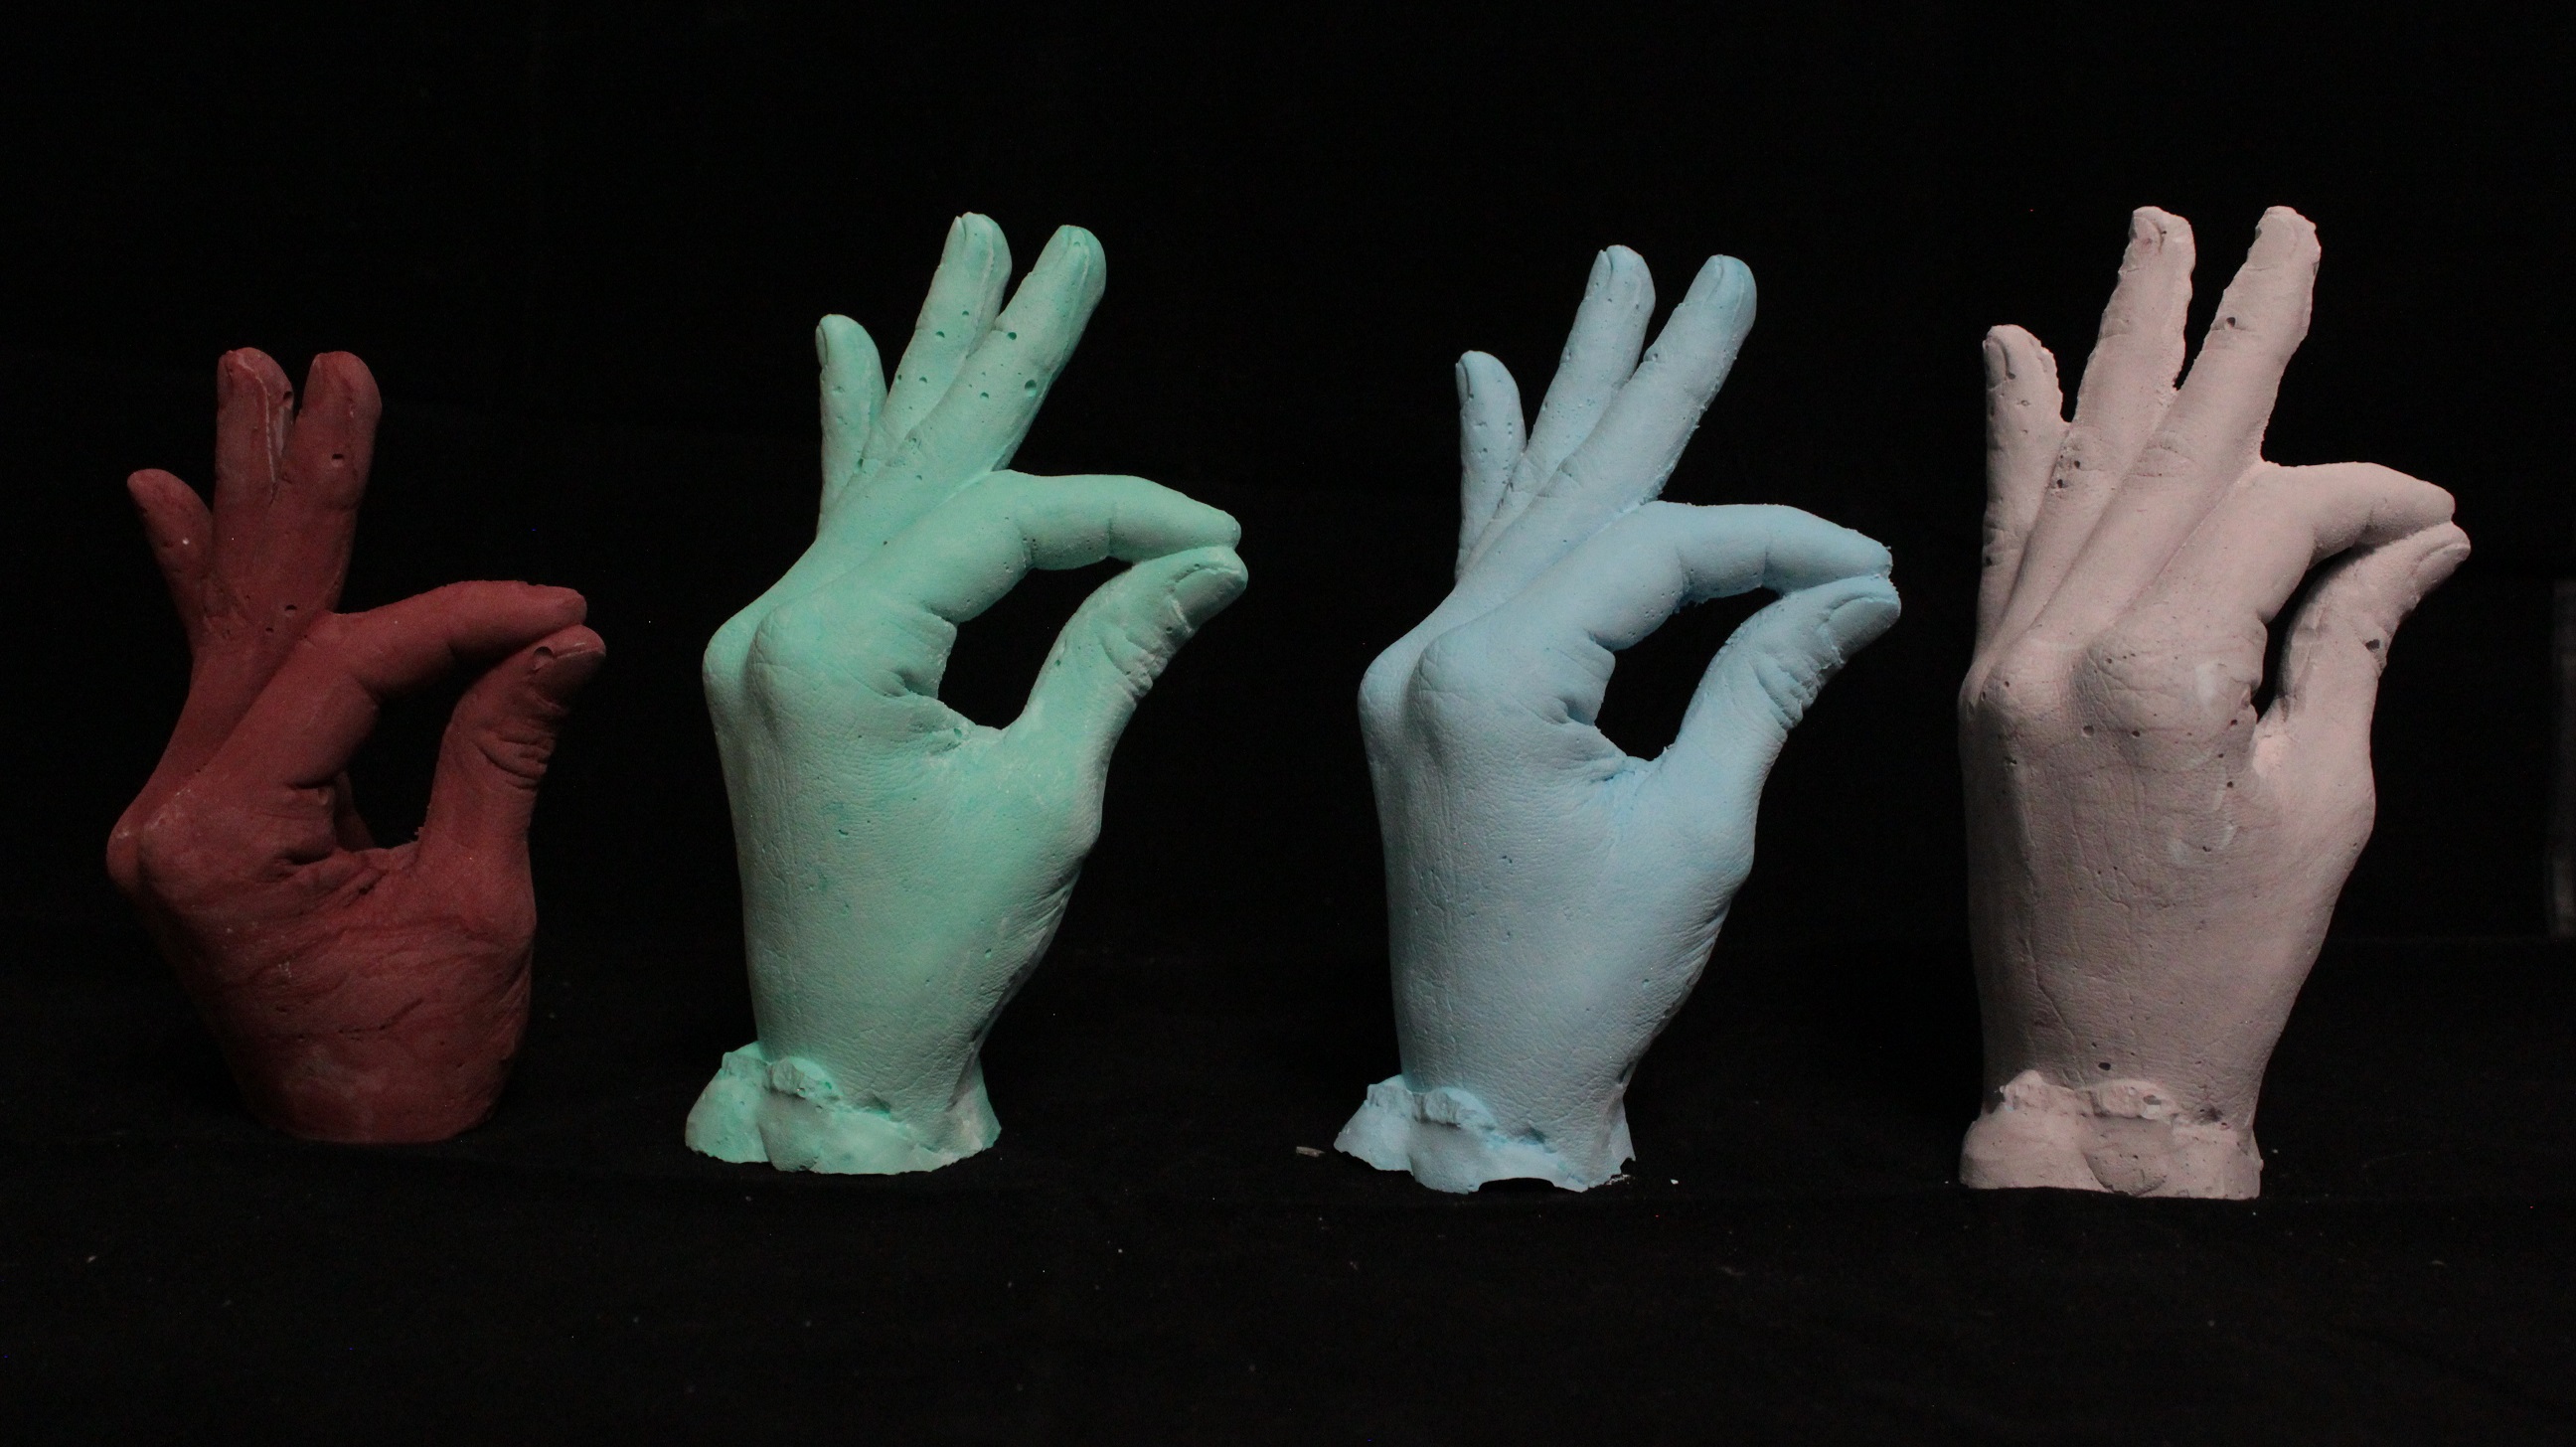 4 Colors of Plaster casting of Hand - Red, Blue, Green, Lavendar